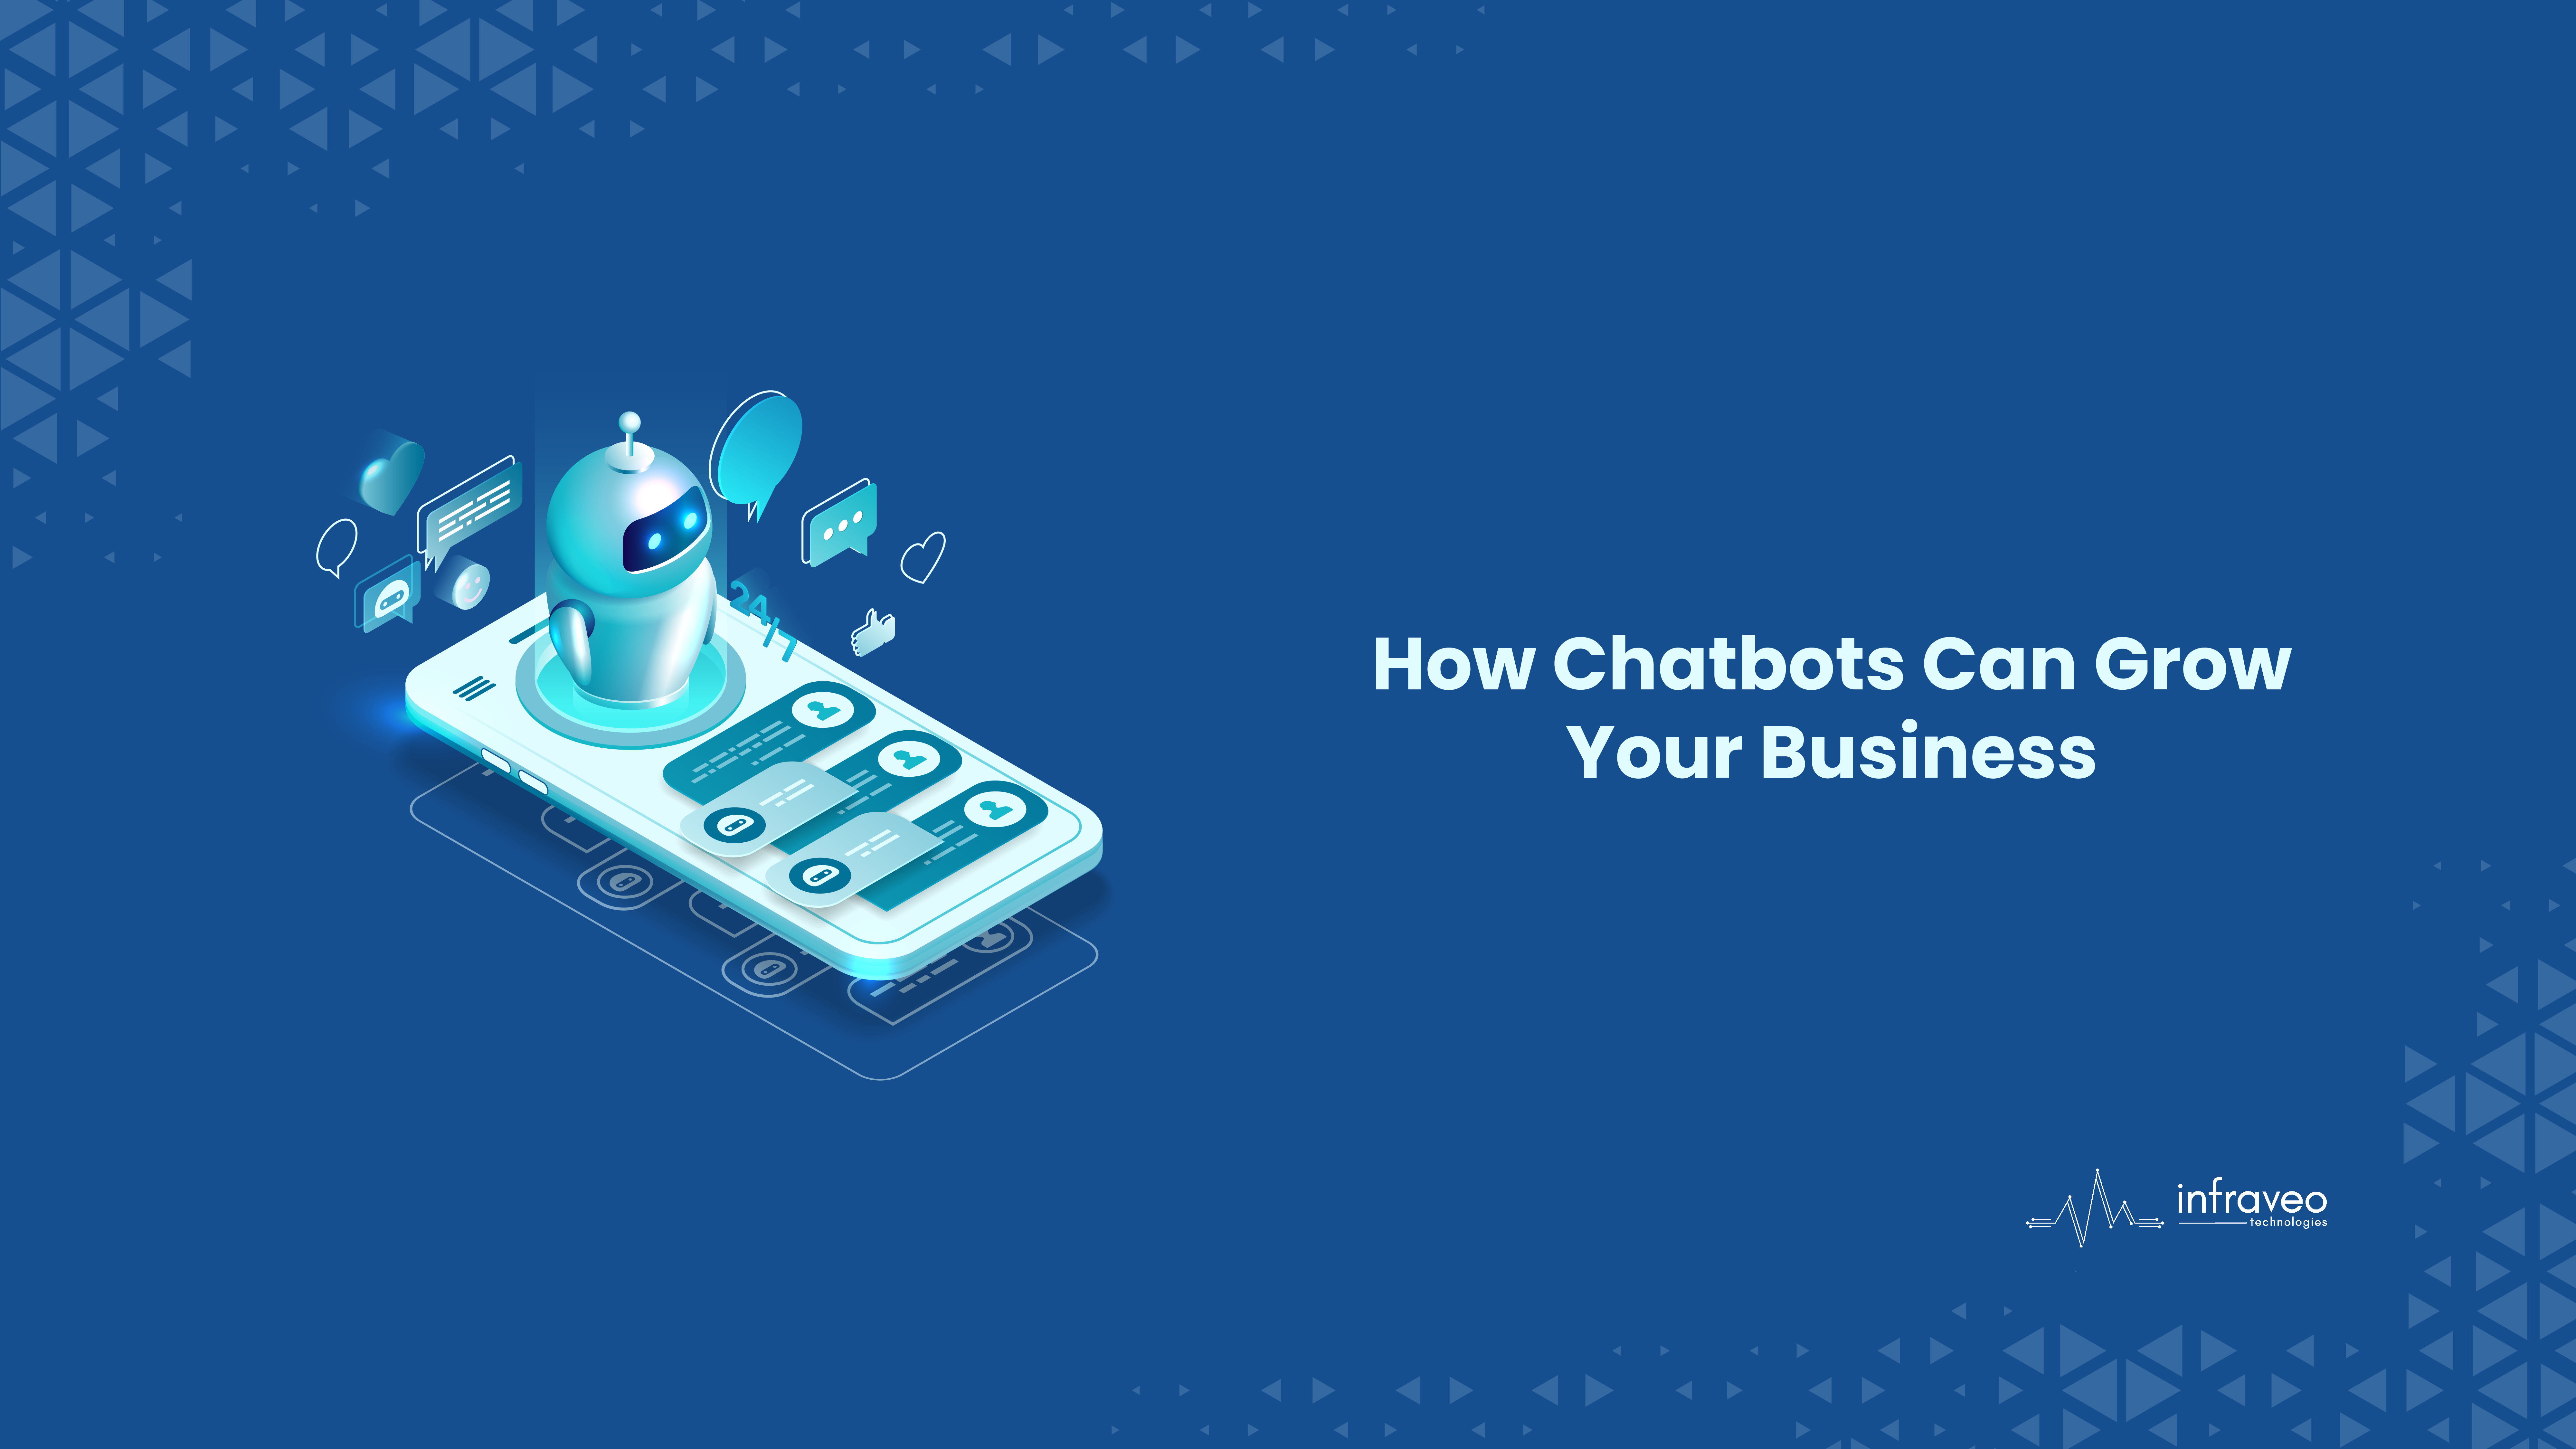 How to build a Chatbot?